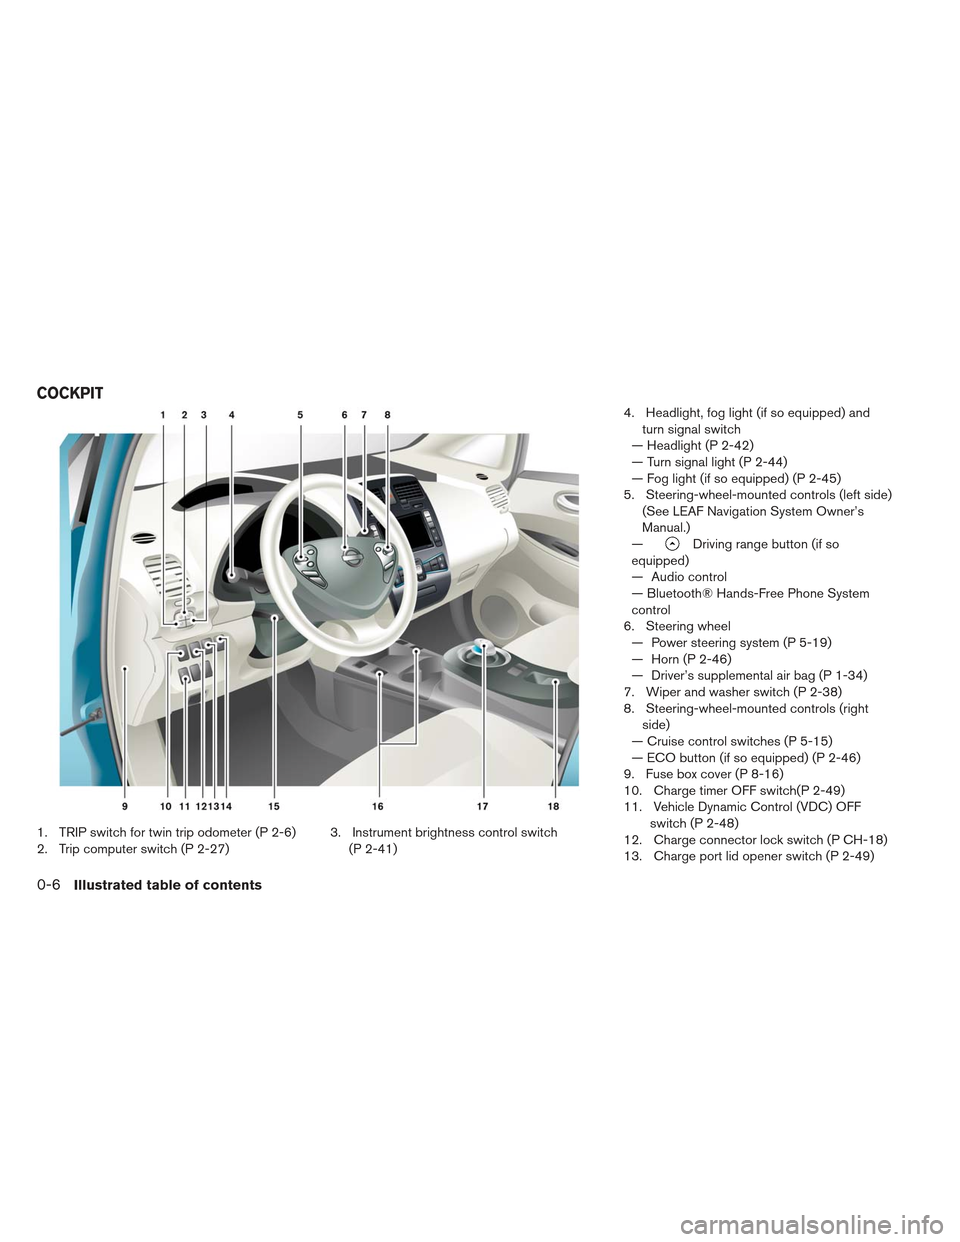 NISSAN LEAF 2013 1.G User Guide 1. TRIP switch for twin trip odometer (P 2-6)
2. Trip computer switch (P 2-27)3. Instrument brightness control switch
(P 2-41) 4. Headlight, fog light (if so equipped) and
turn signal switch
— Headl